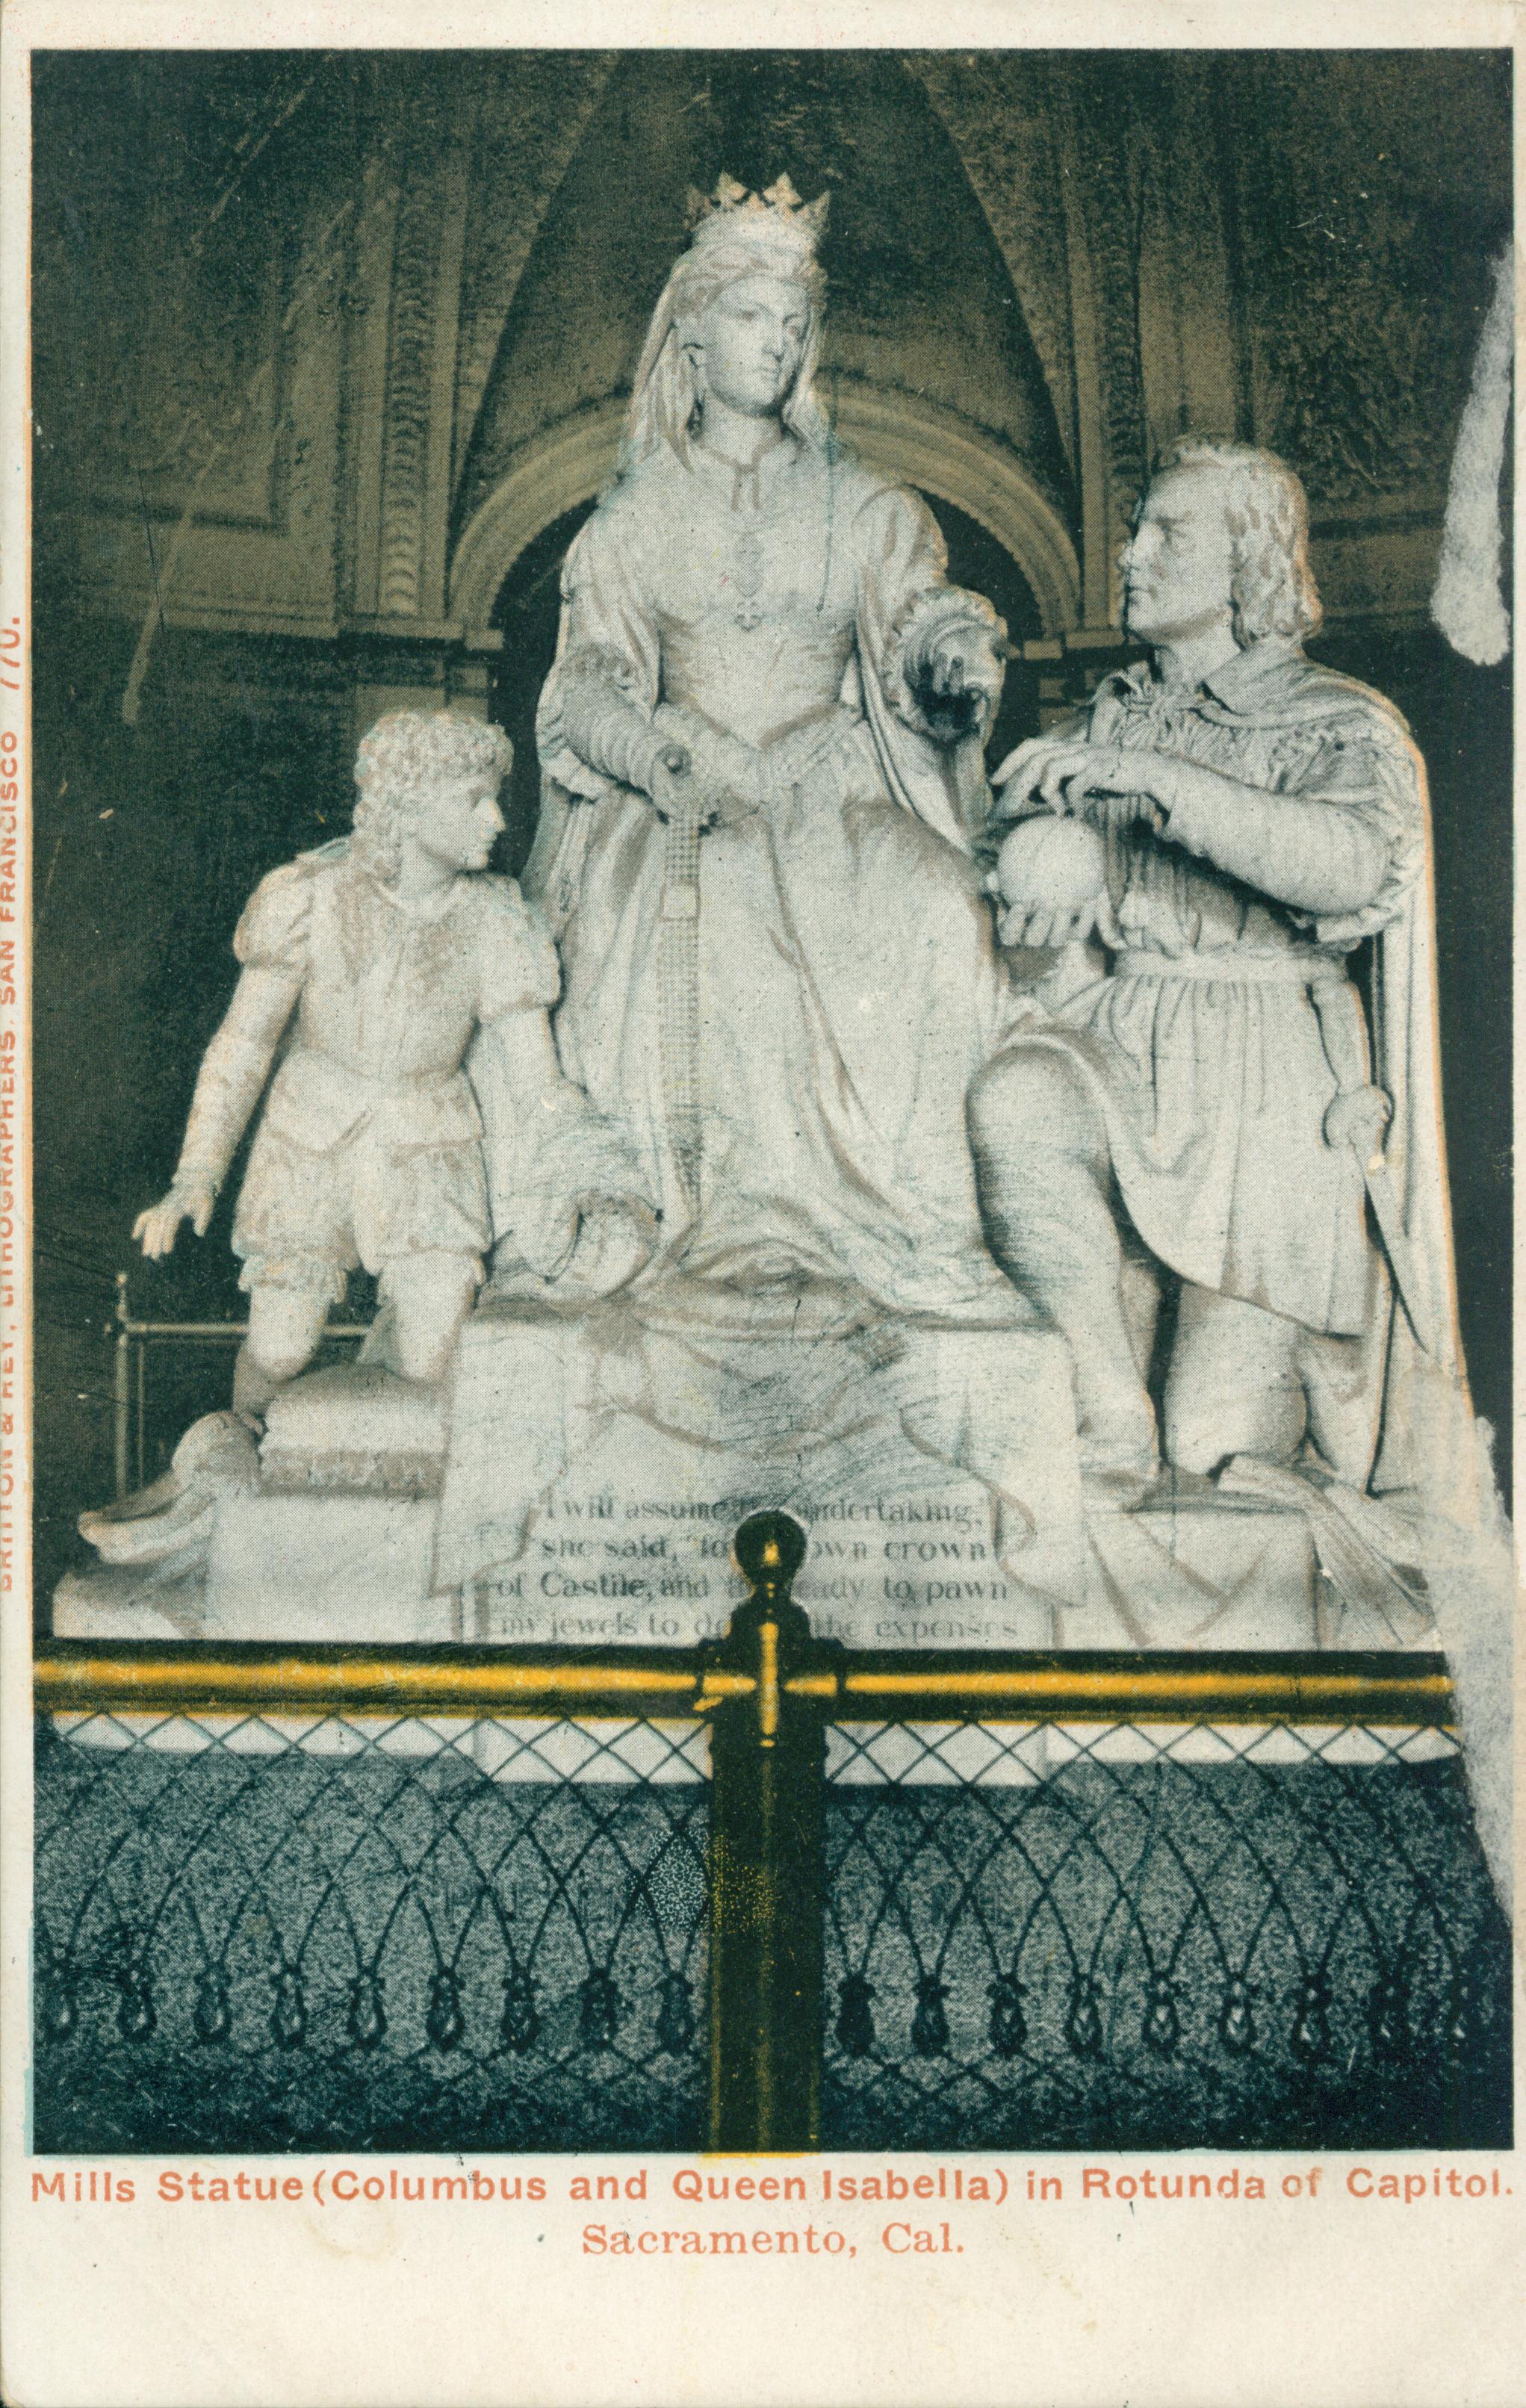 This postcard shows a statue of Columbus kneeling to receive jewels from a seated Queen Isabella.